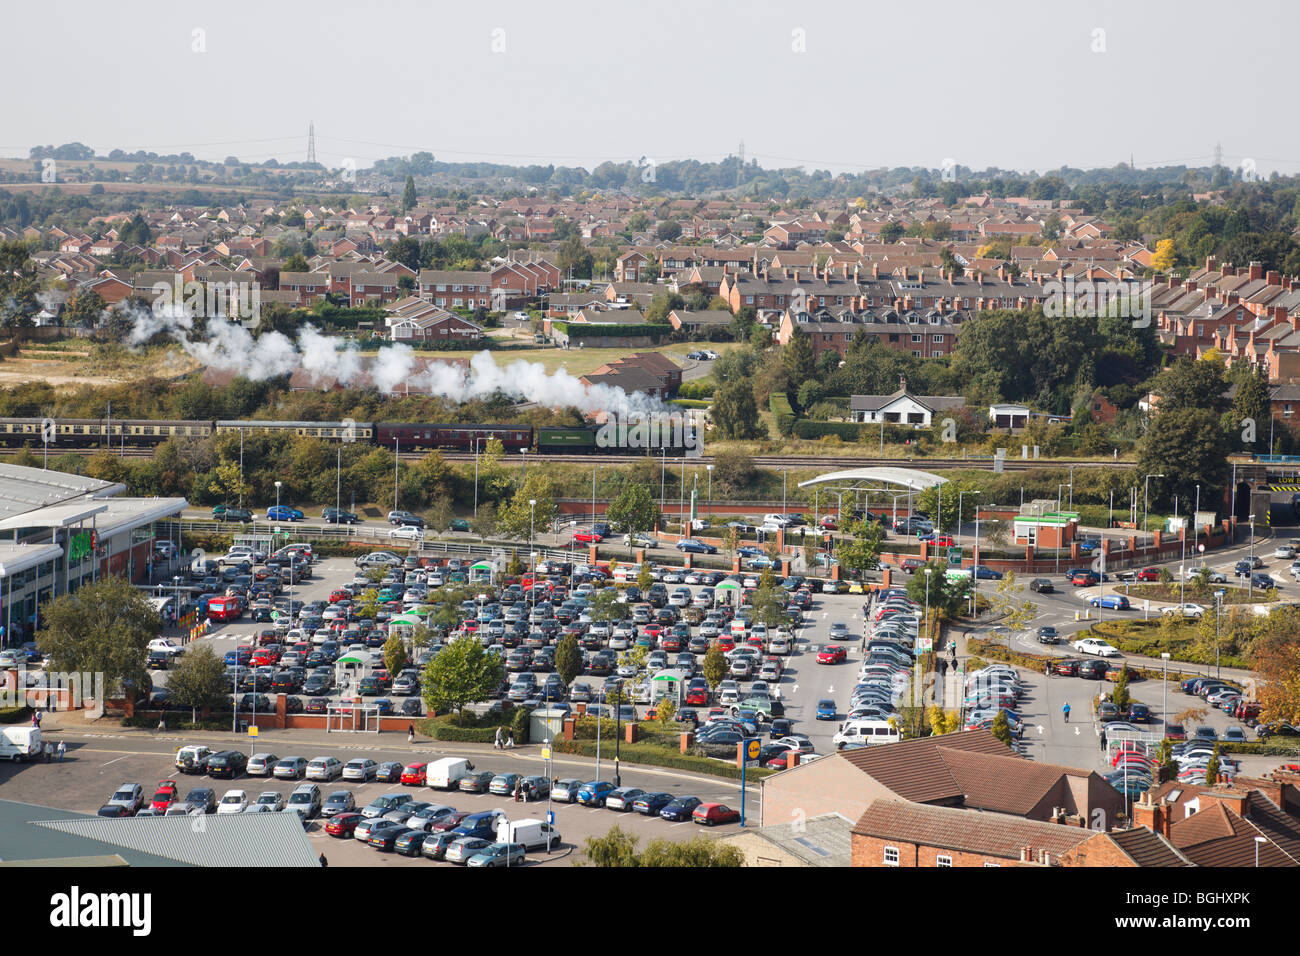 Aerial veiw over Grantham Asda supermarket, with the 'Tornado' steam train in the background. Stock Photo